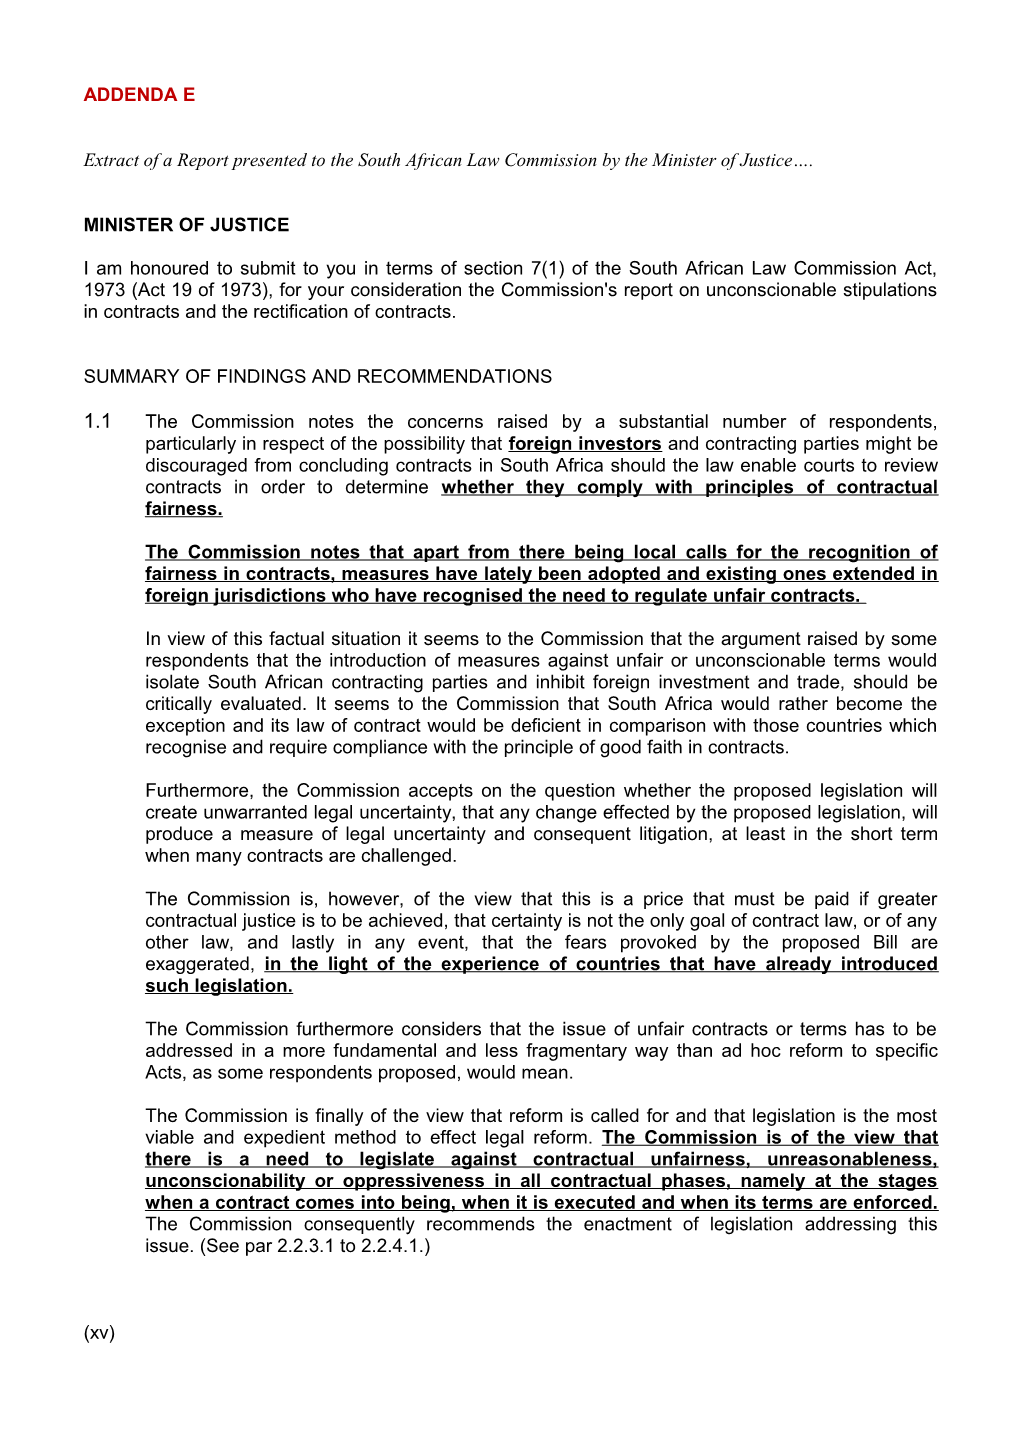 Extract of a Report Presented to the South African Law Commission by the Minister of Justice